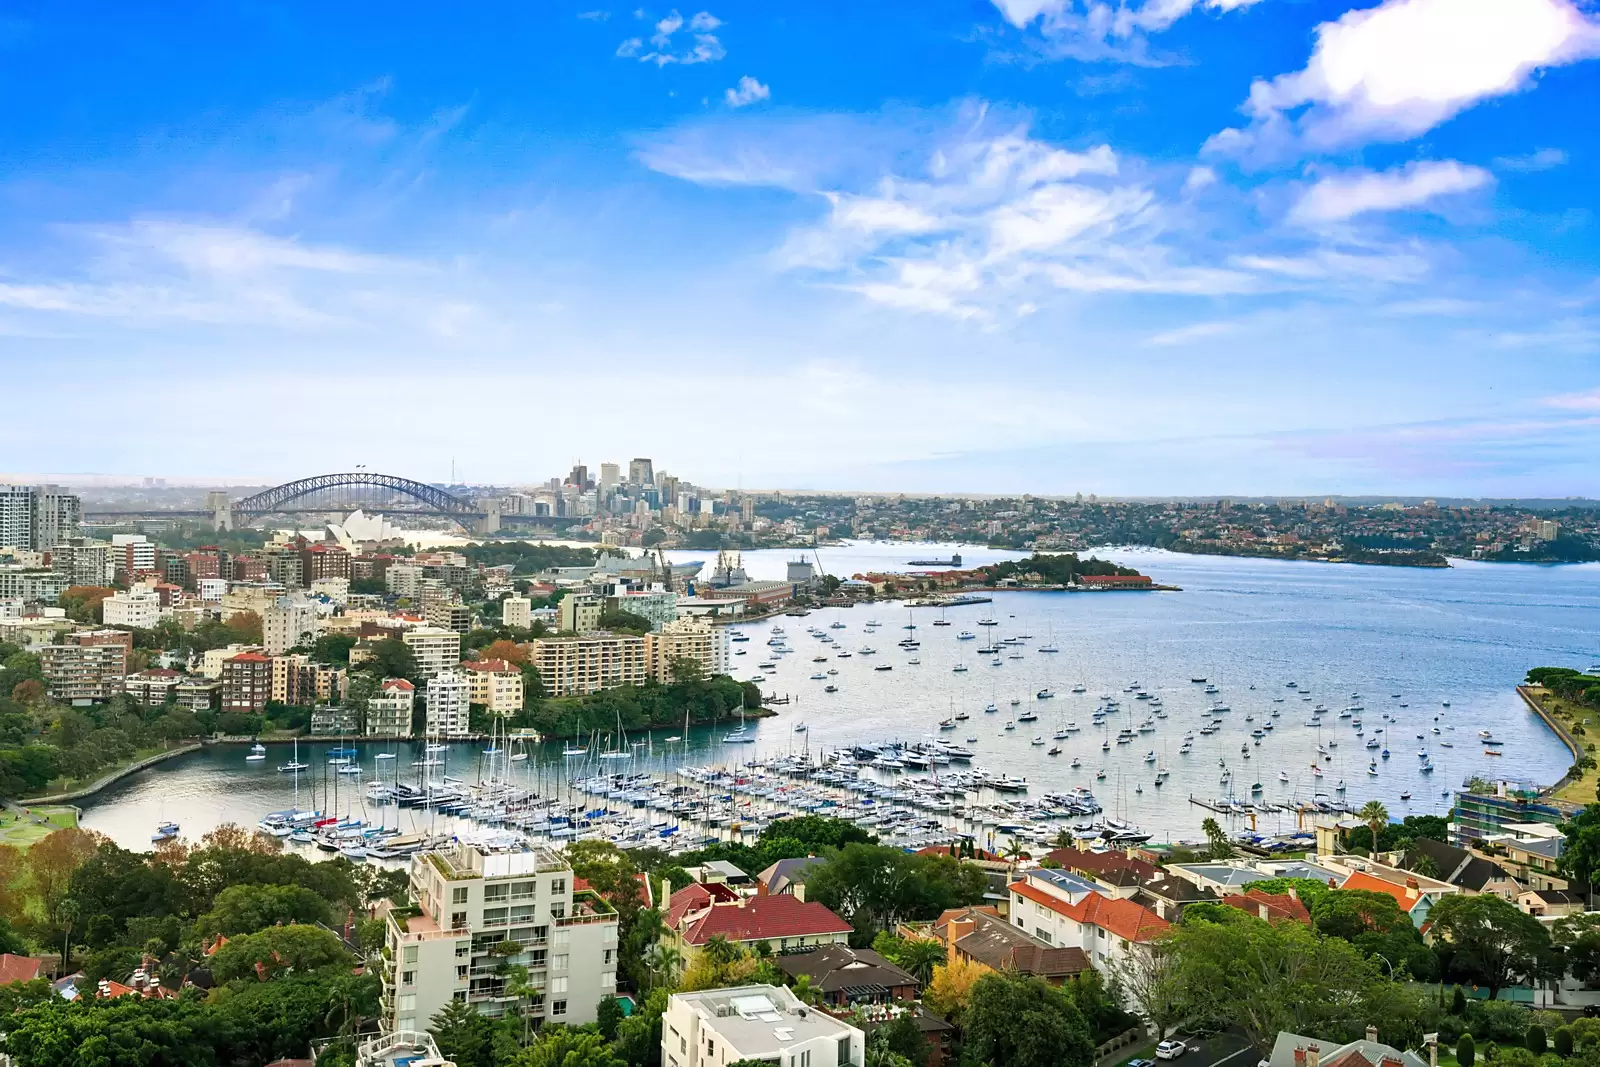 Photo #7: 23A/3 Darling Point Road, Darling Point - Sold by Sydney Sotheby's International Realty